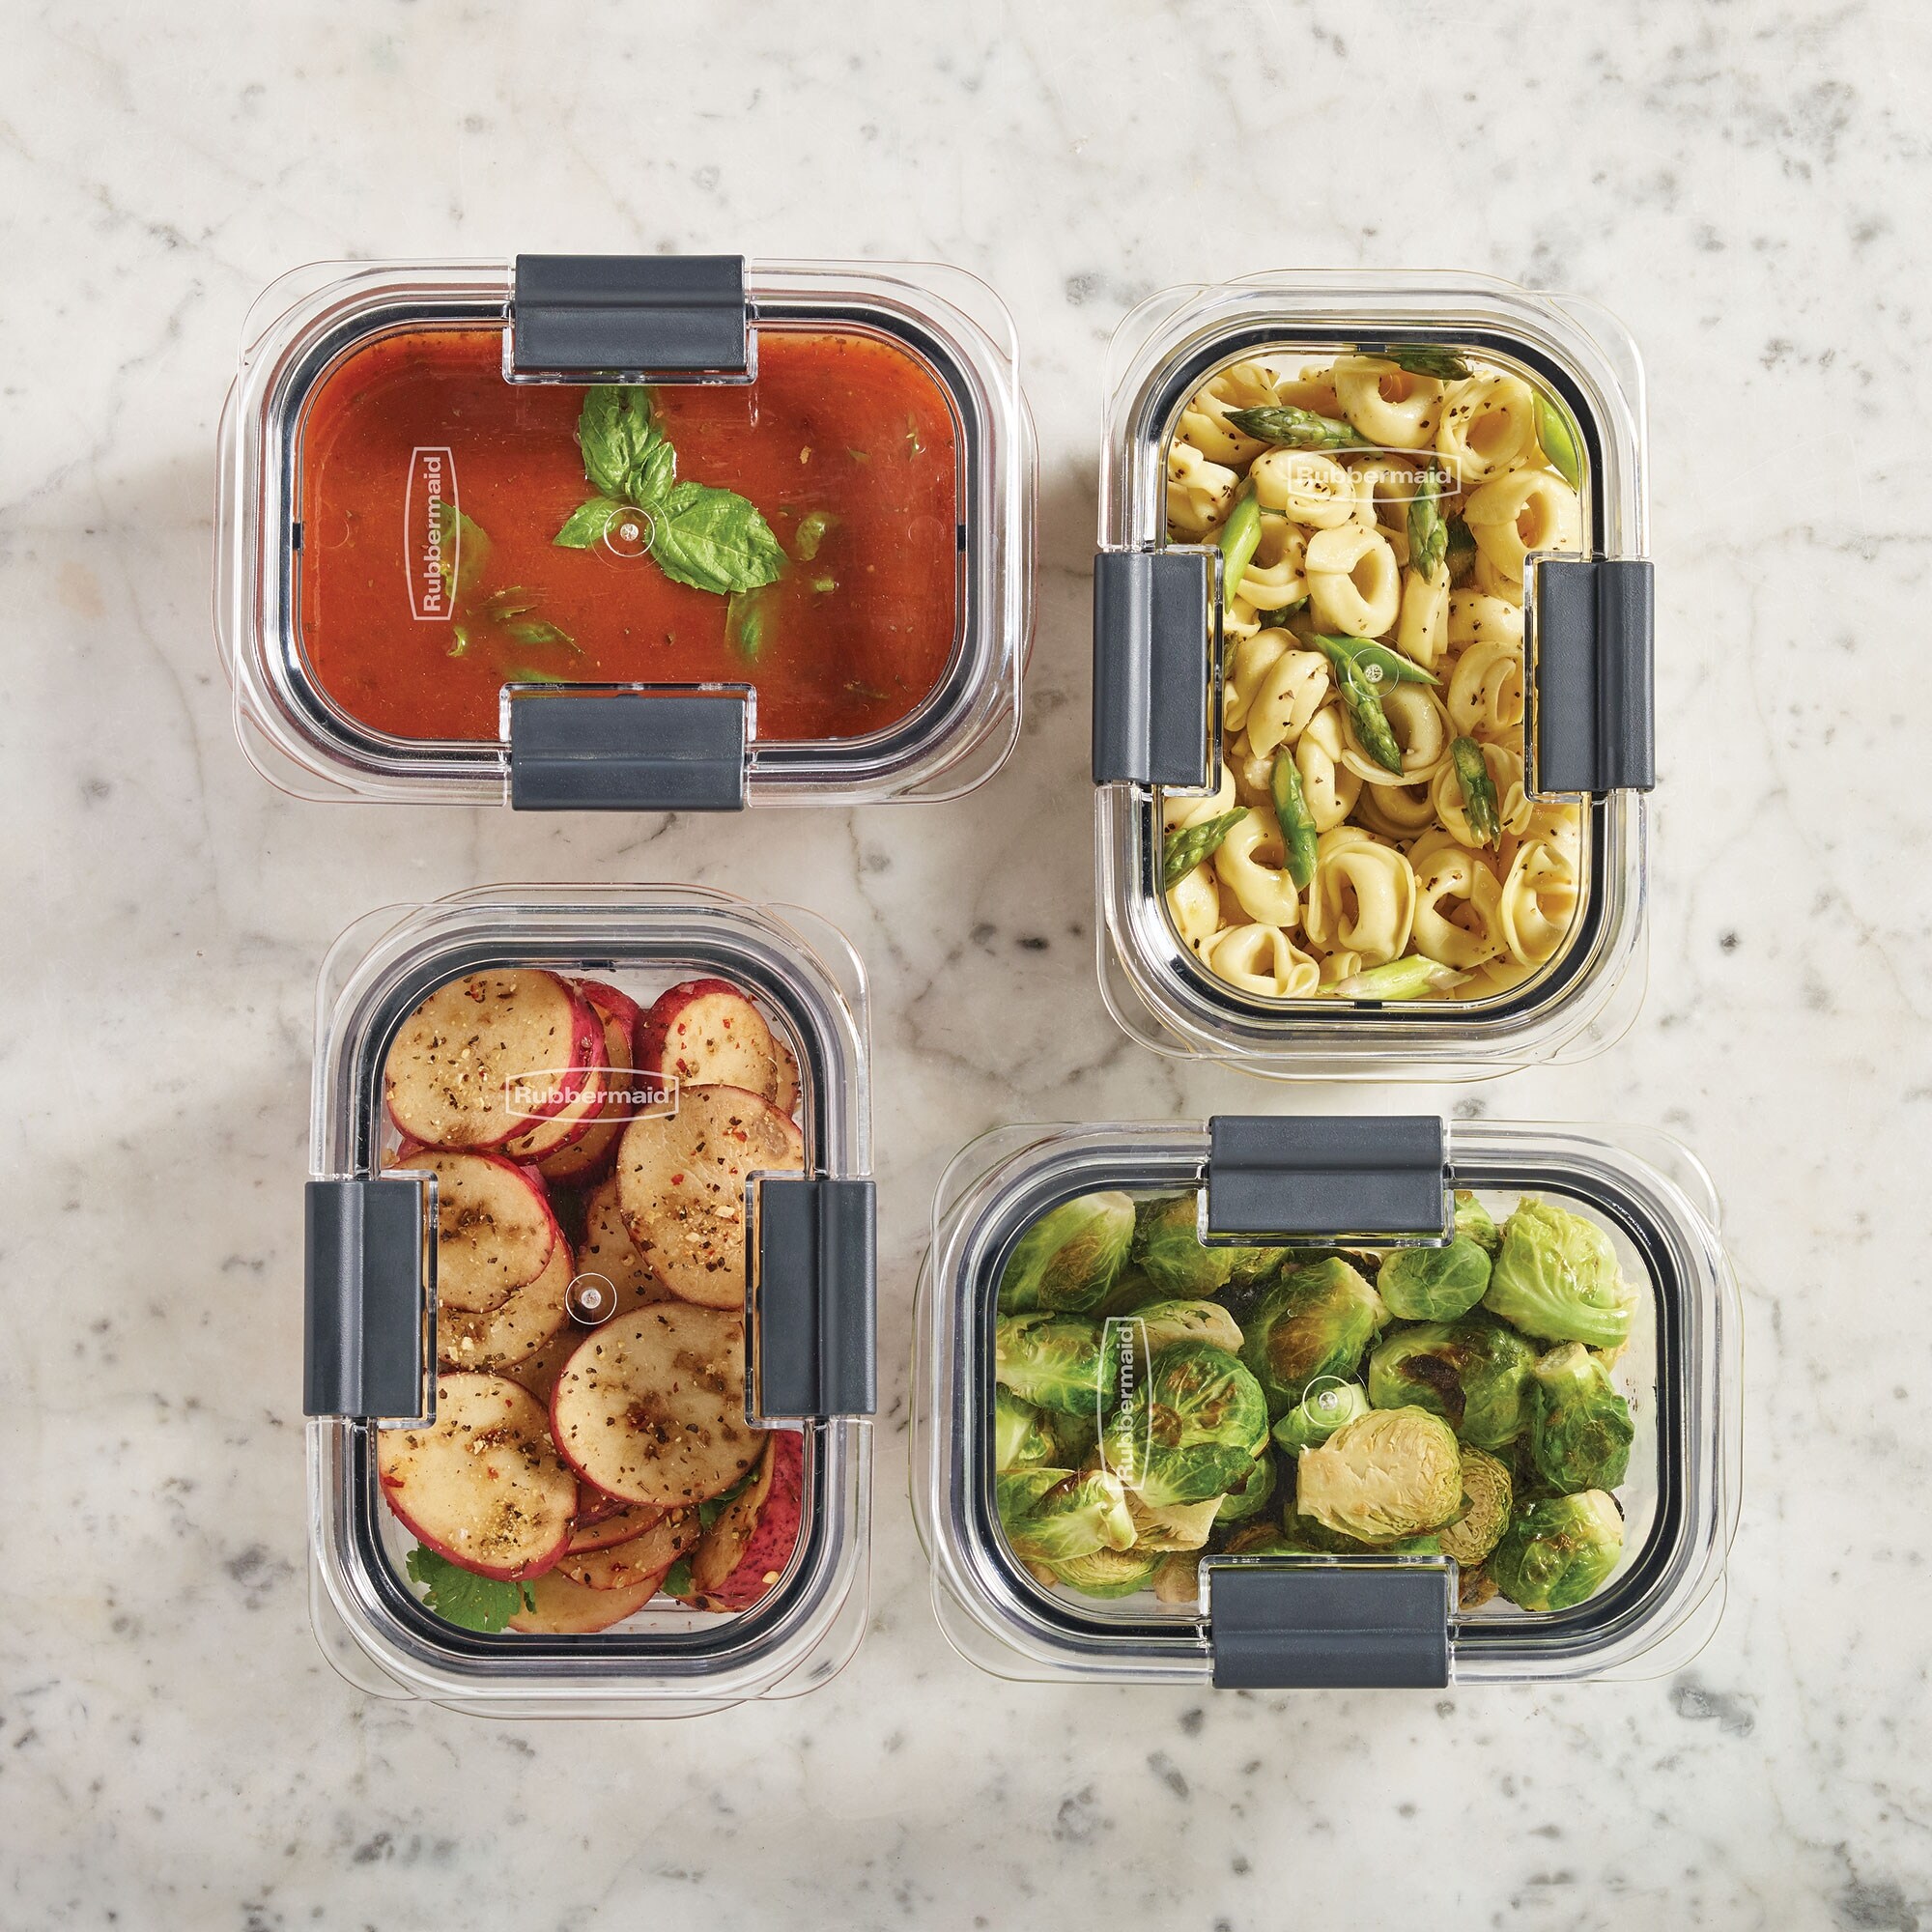 https://ak1.ostkcdn.com/images/products/is/images/direct/3d235070172e59521bd74aa1925ee4f0591a6747/Rubbermaid-Brilliance-Food-Storage-Containers%2C-Set-of-11-%2822-Pieces-Total%29%2C-Clear.jpg